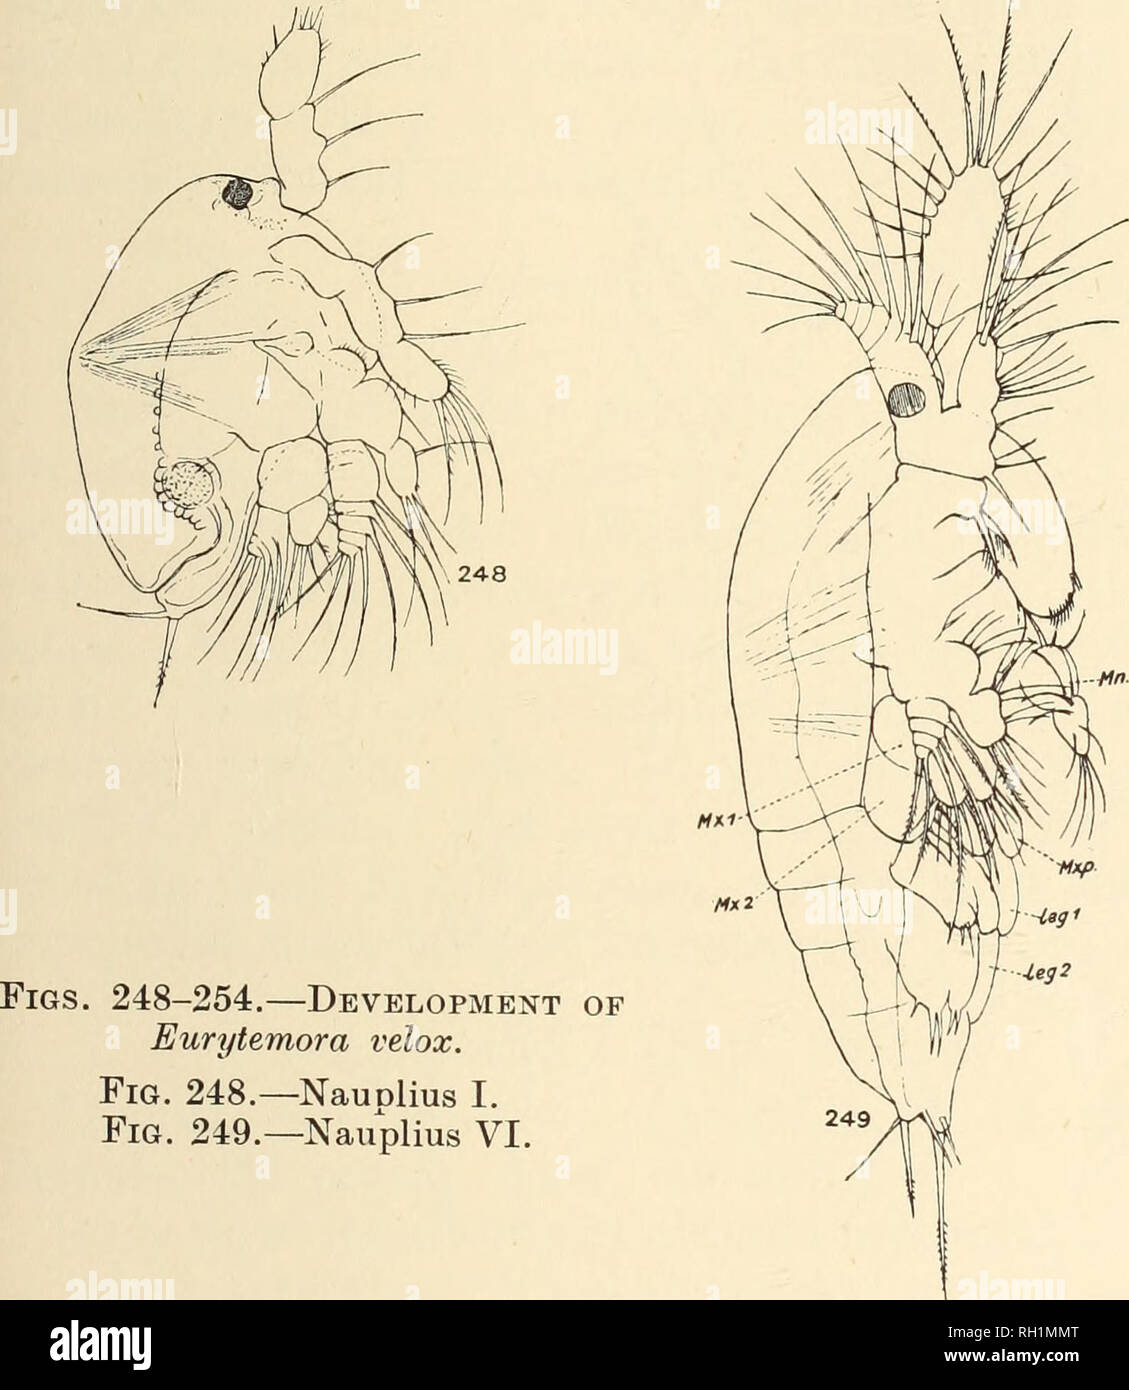 . British fresh-water Copepoda. --. Copepoda; Crustacea. EURYTEMORA. 187 seg. 3 with 3 strong setse and a very delicate seta which eventually becomes the aesthete of the adult. Antenna : Coxa with 1 strong spine ; basis with 1 spine and 2 setae ; endopod unsegmented, with 3 terminal setae ; exopod of 5 segments with 7 long setae. Mandible : Basis with 2 strong spines ; endopod unsegmented,.  broad, with a proximal group of 3 setae and terminal group of 5. Exopod 4-segmented, with 5 setae. This stage lasts a very short time, and is rarely found in the plankton. Naujdius II. Length -IS--17 mm.  Stock Photo